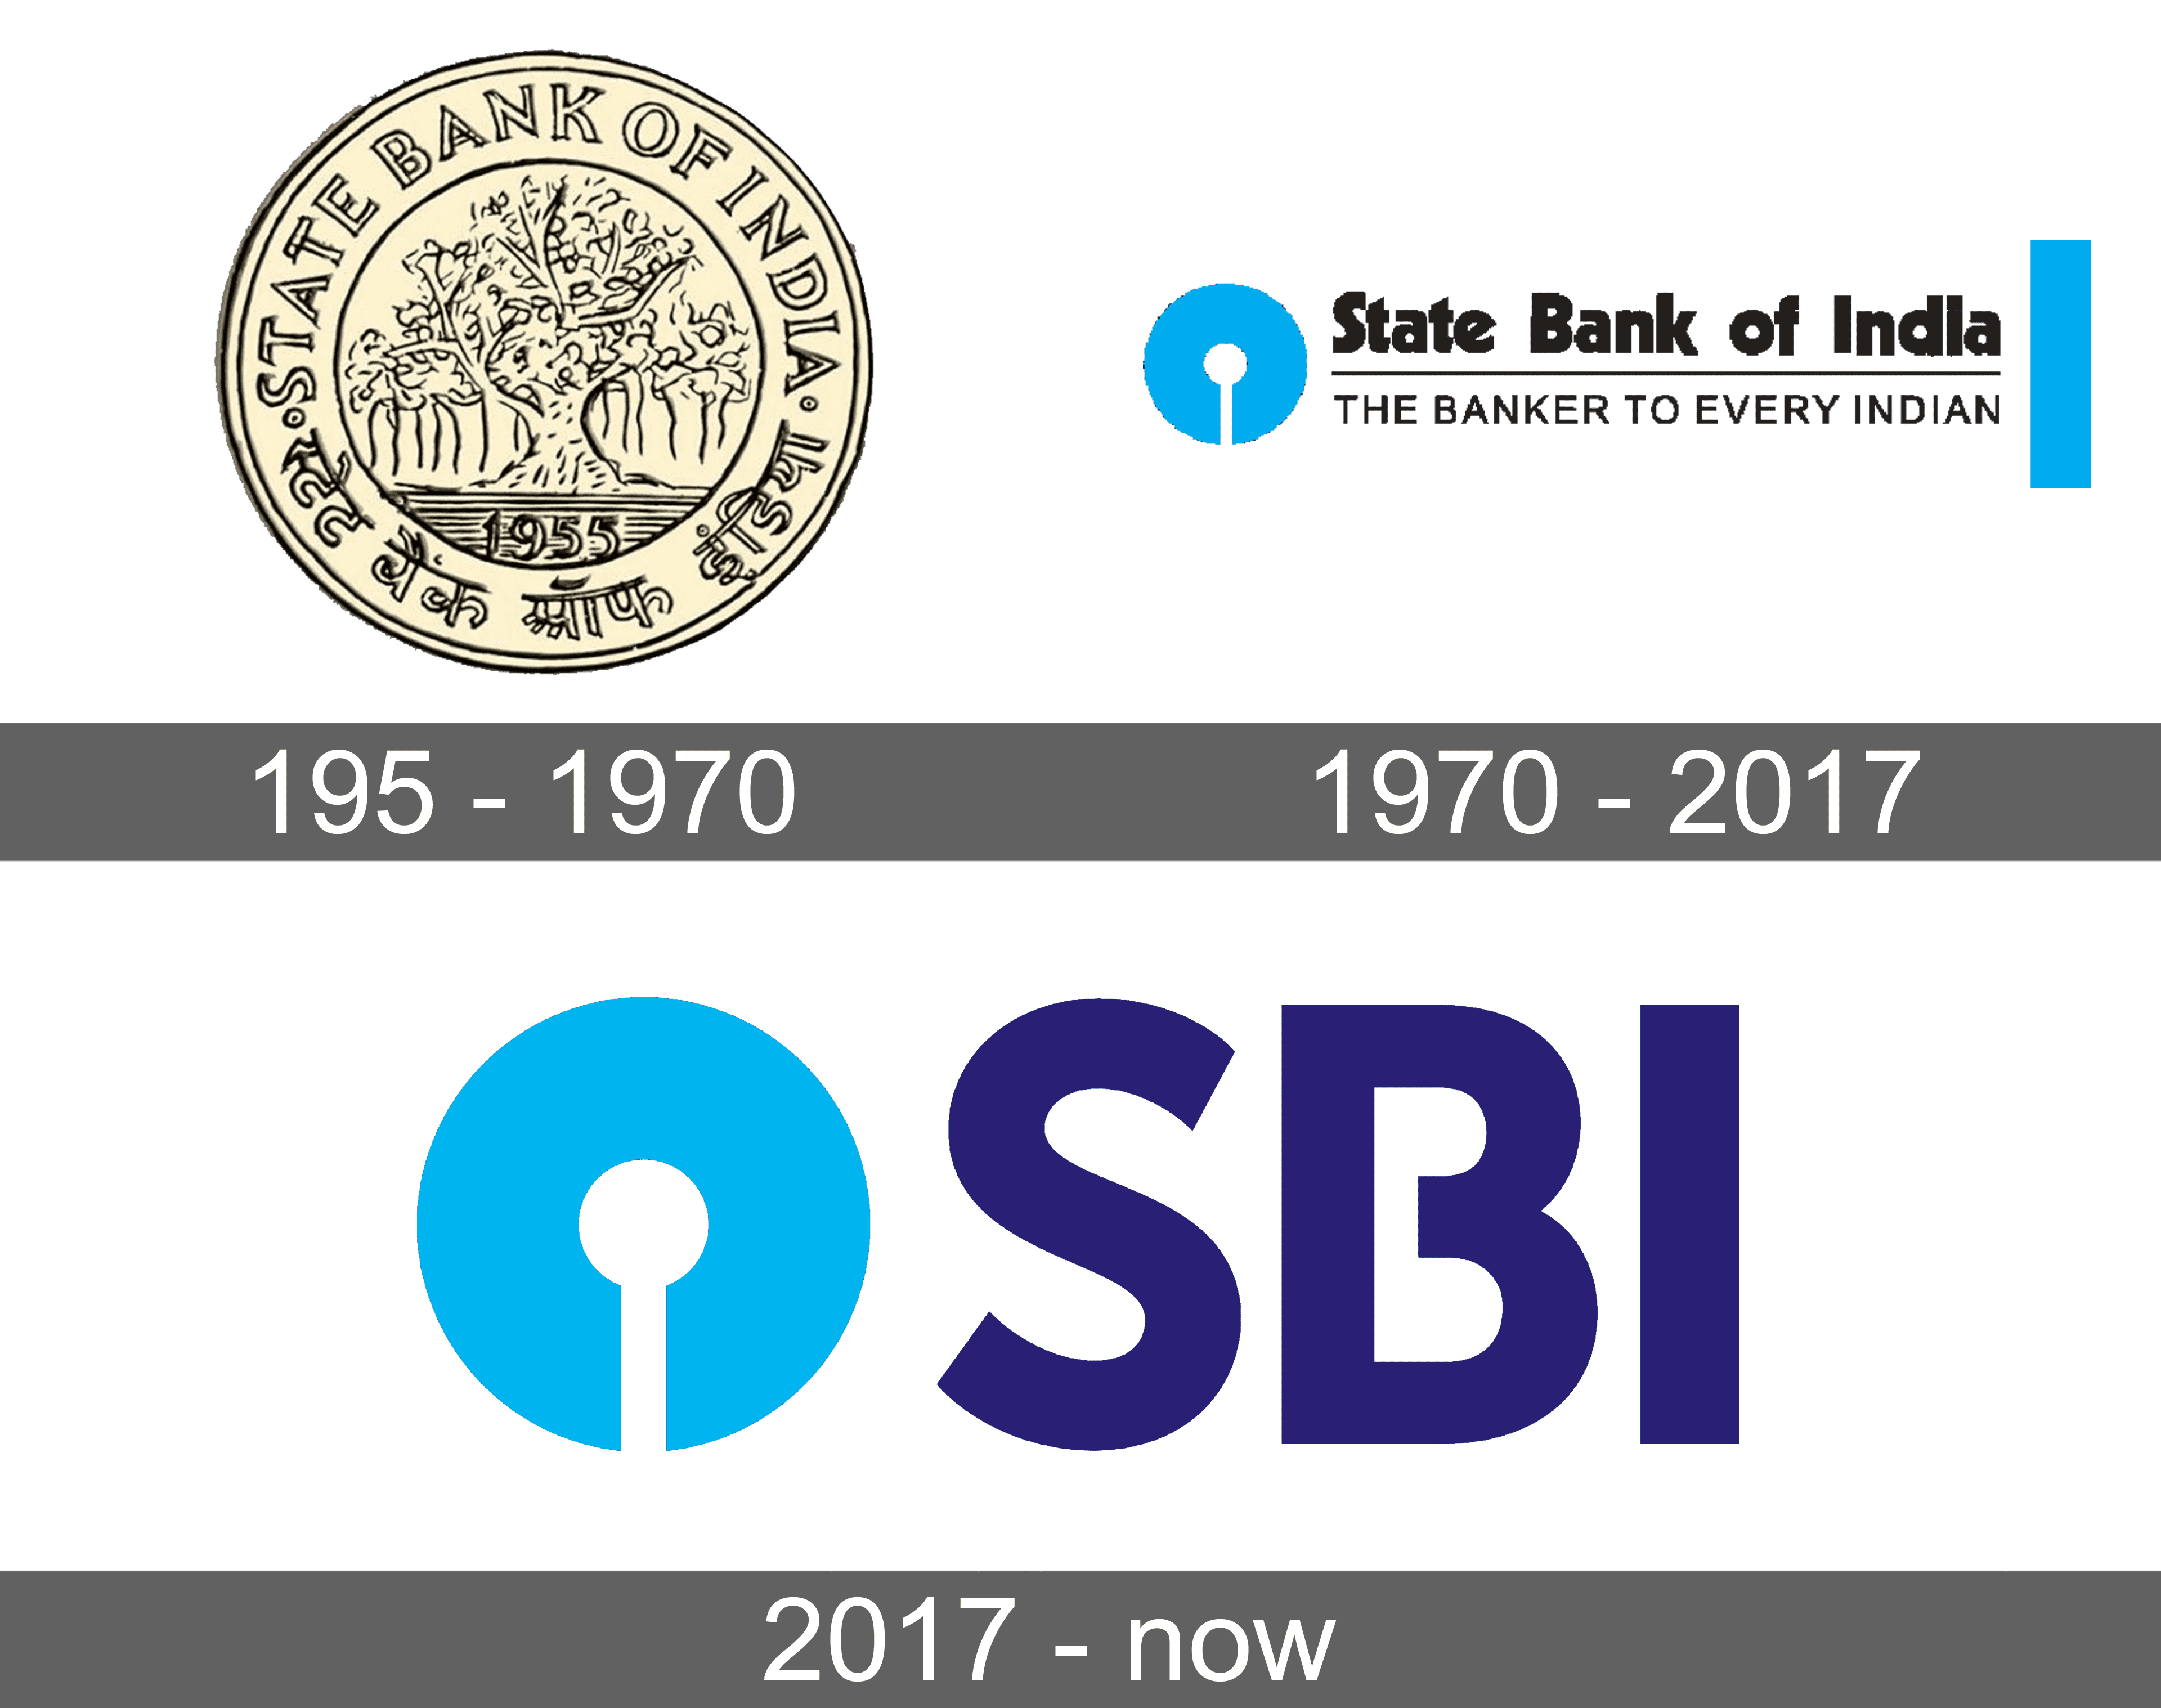 What are some Amazing facts about SBI? - Quora